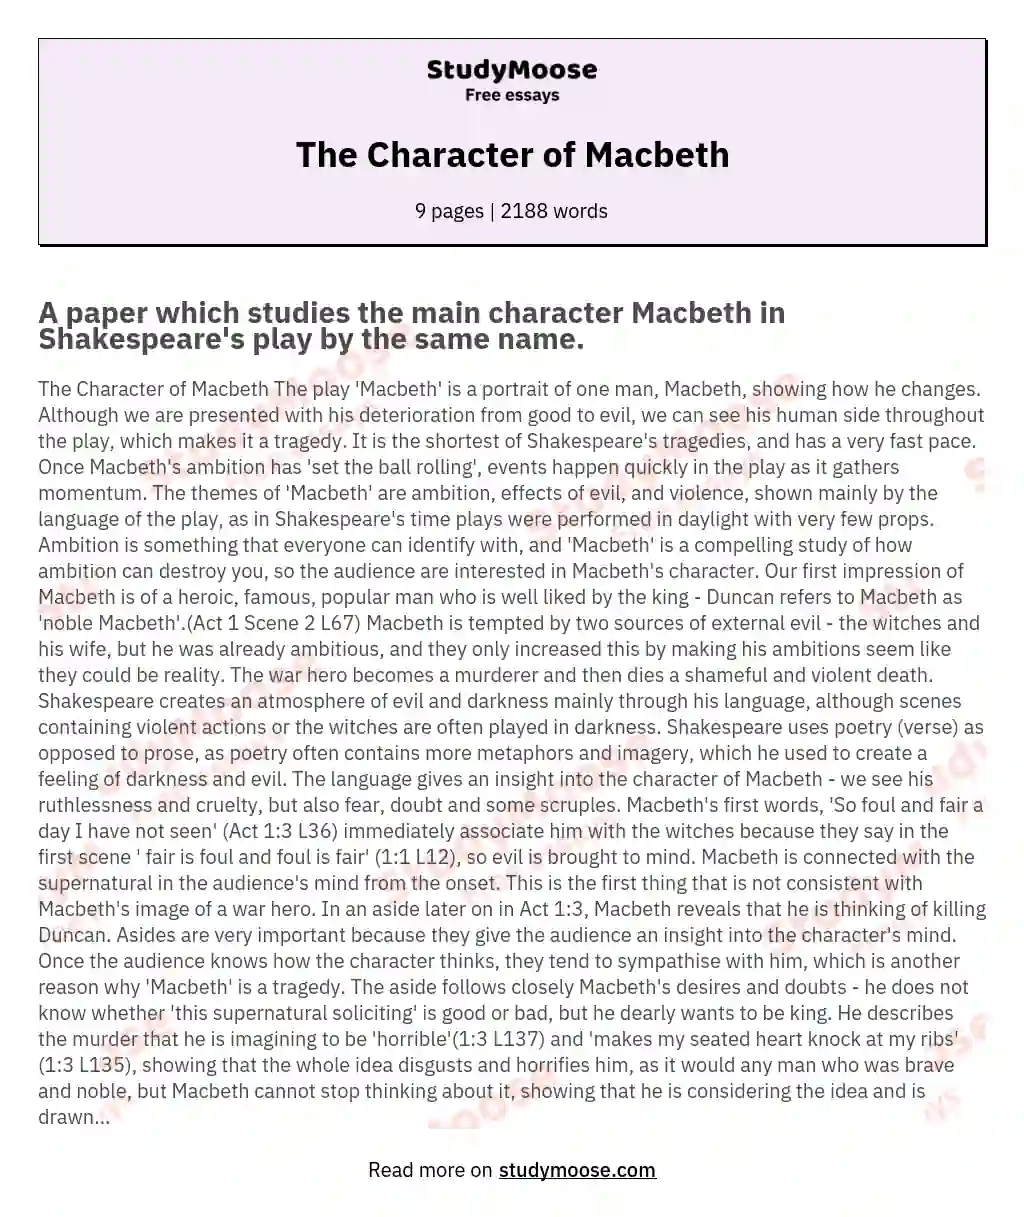 The Character of Macbeth essay